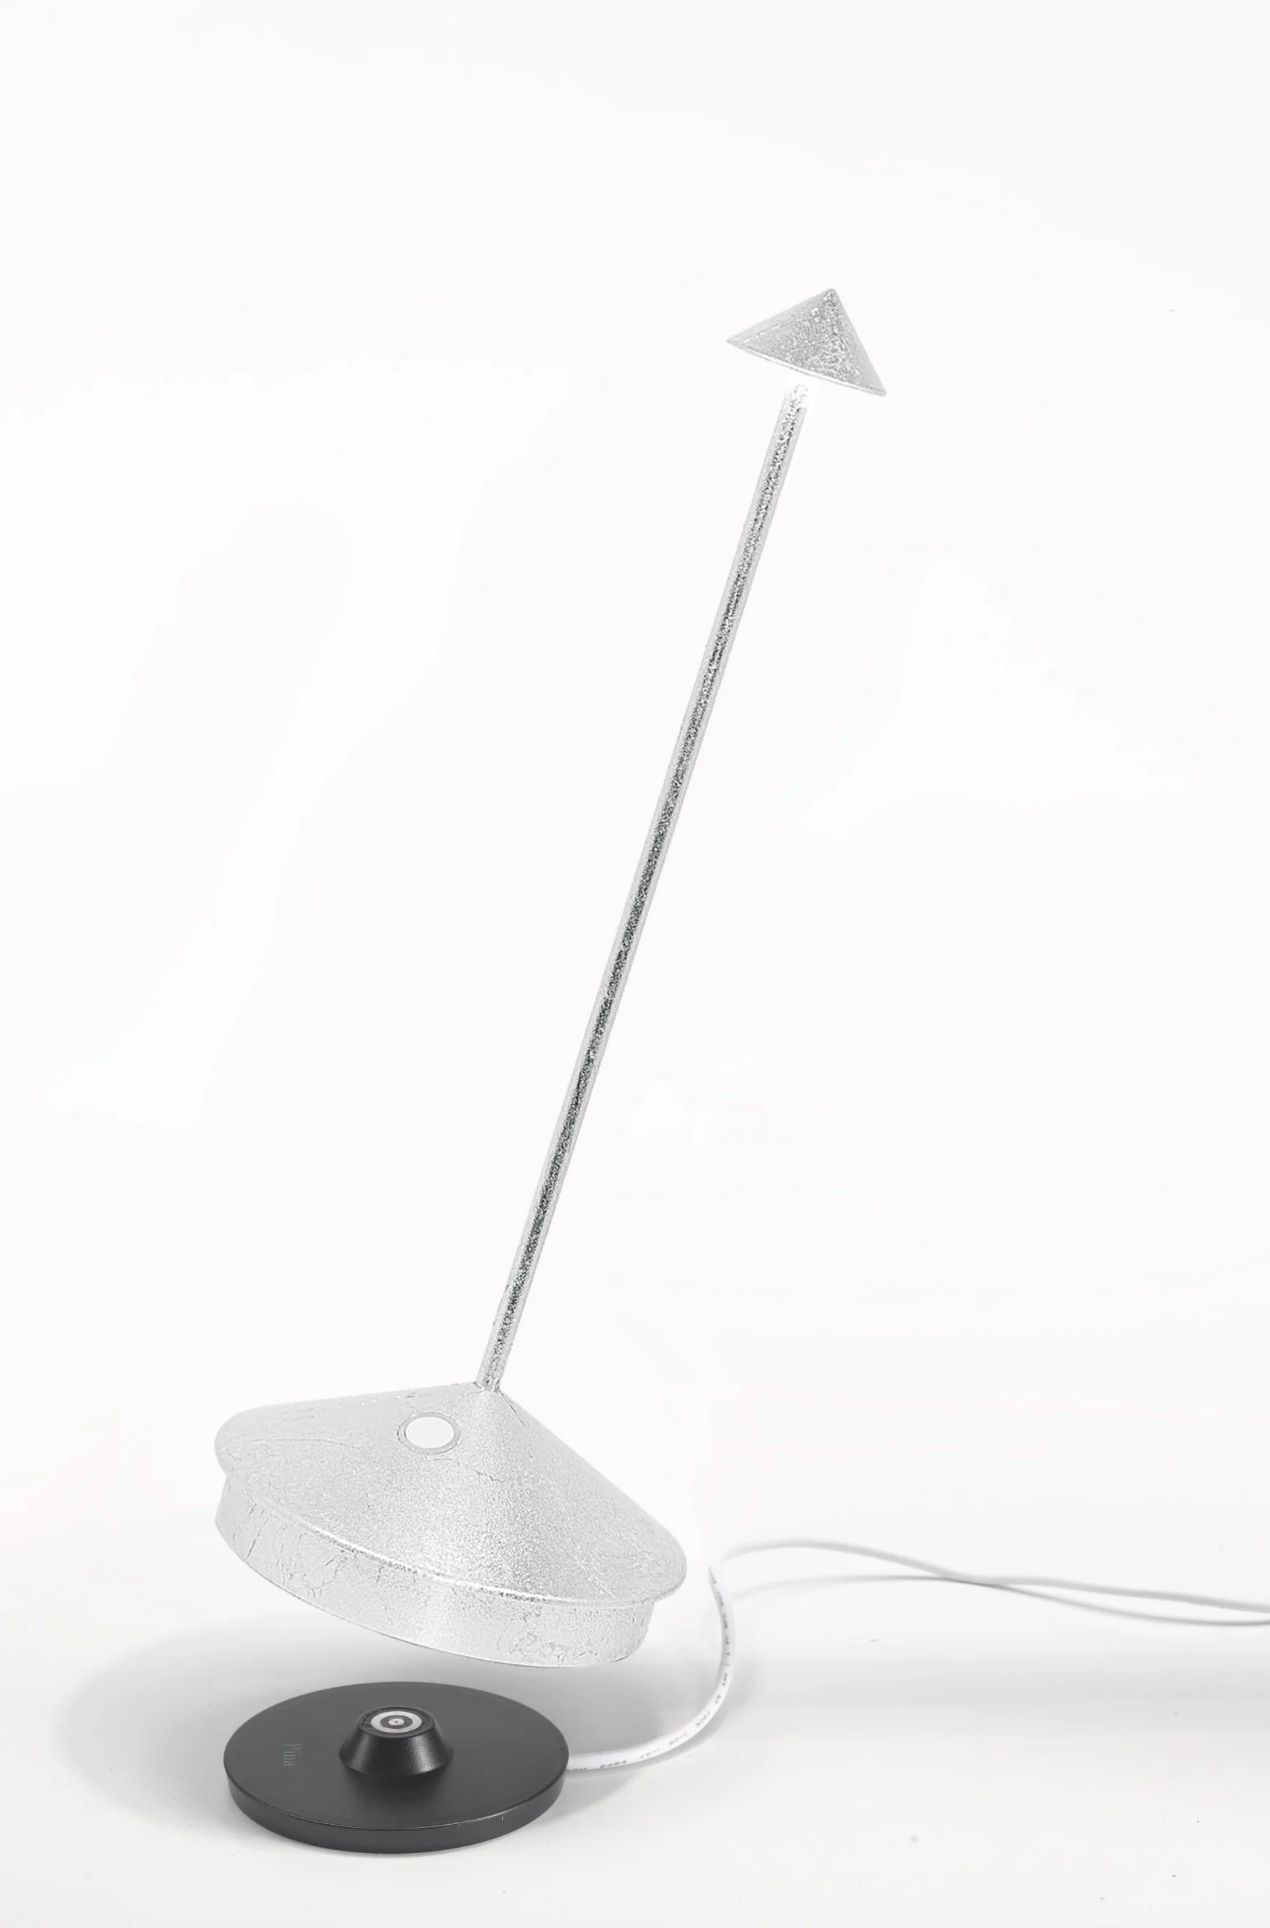 Pina Pro Cordless Rechargeable Table Lamp